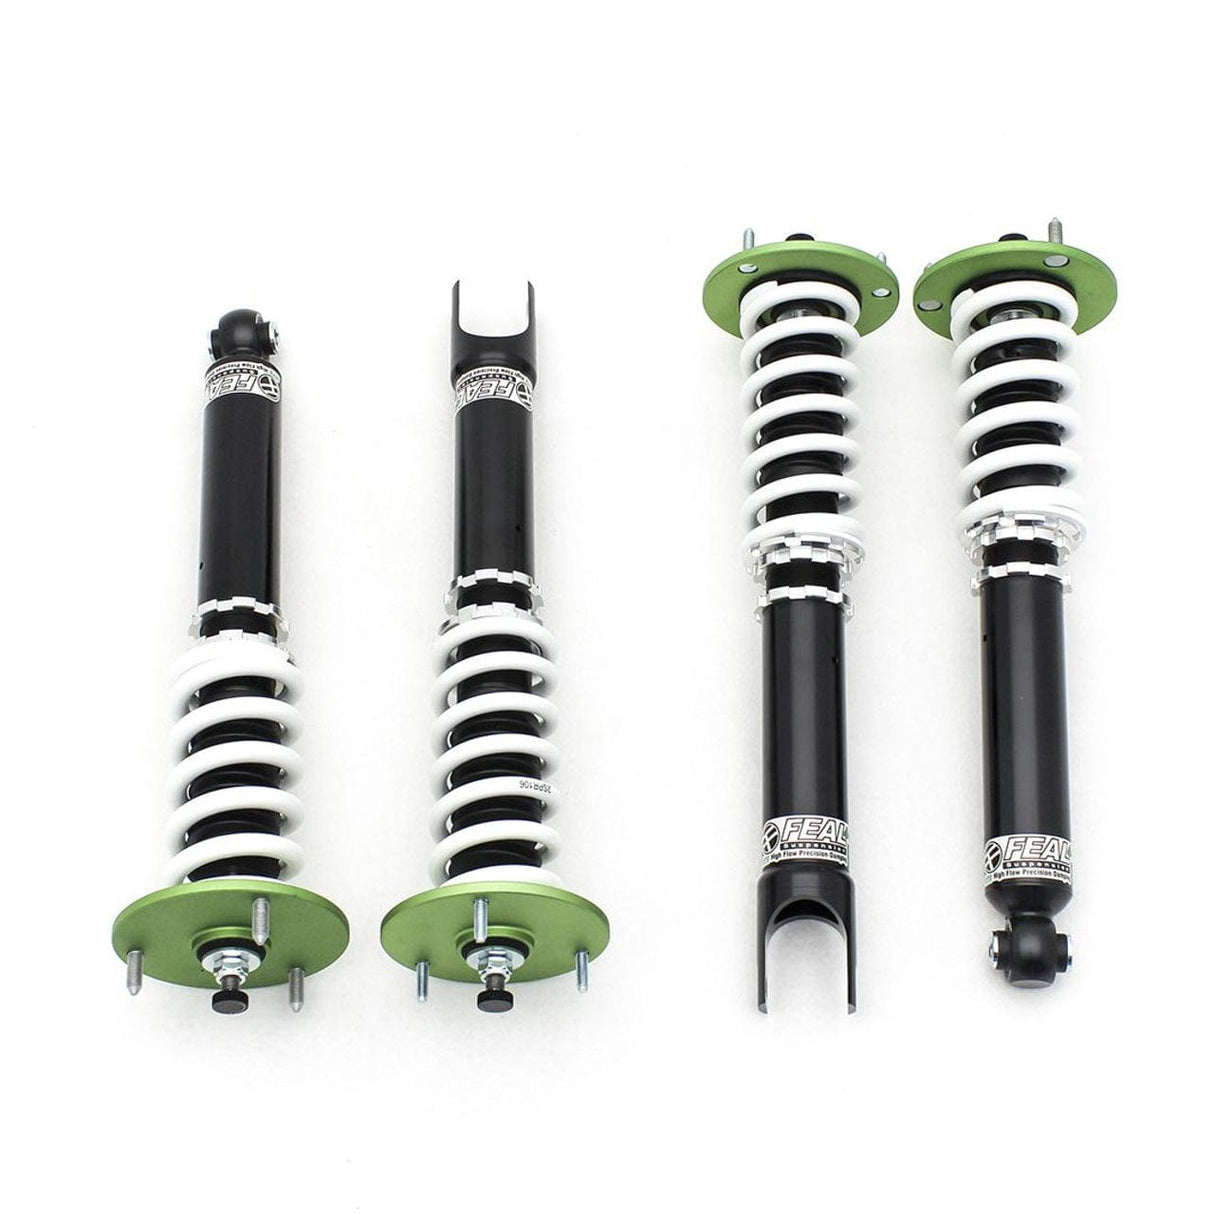 Feal 441 Coilovers - 2008-2013 Infiniti G37